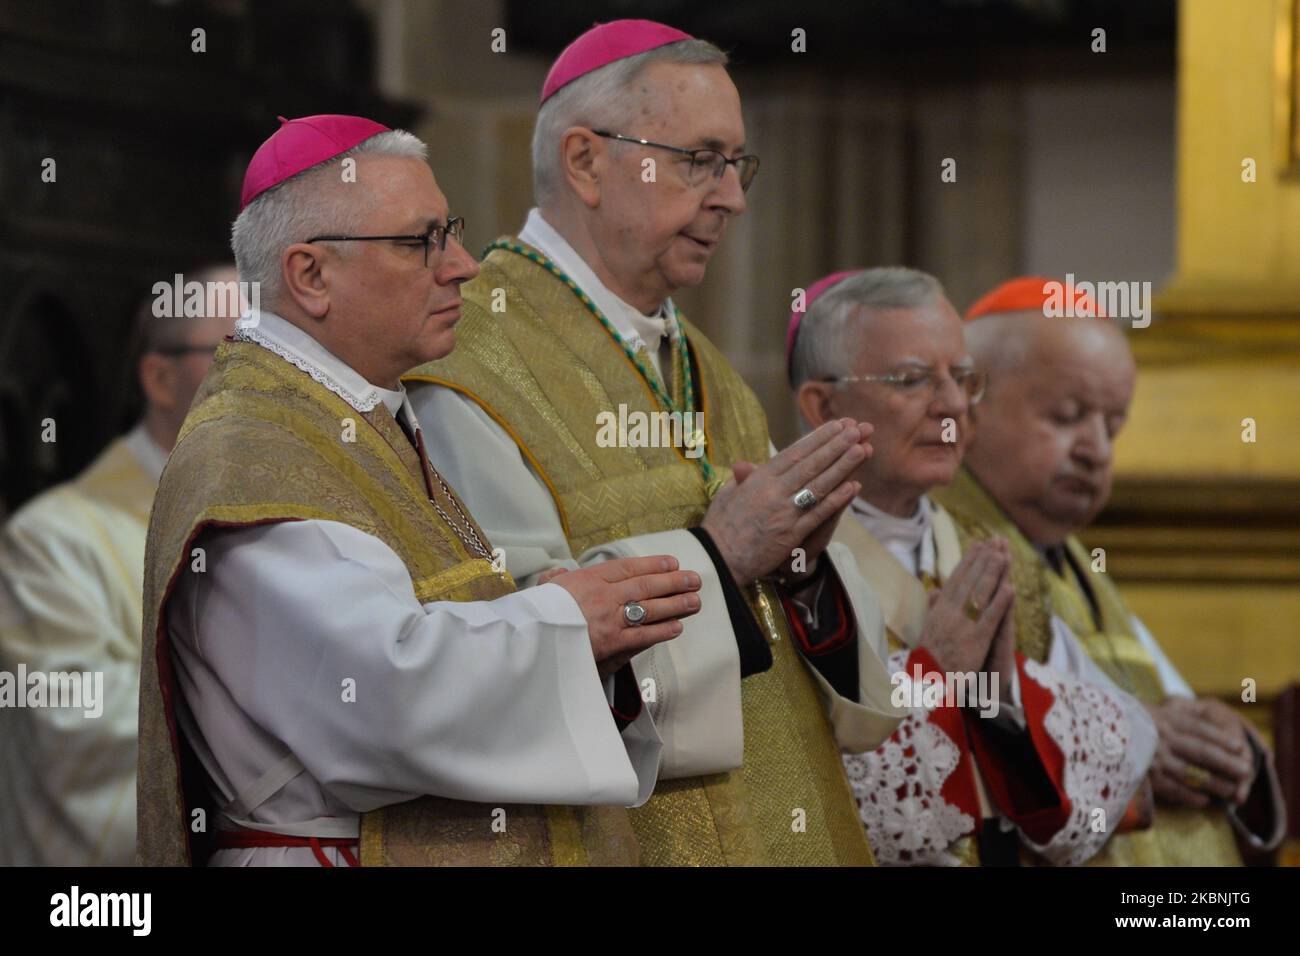 (L-R) Bishop Artur G. Mizinski, Archbishop Stanislaw Gadecki, Archbishop Marek Jedraszewski and Cardinal Stanislaw Dziwisz, during the Holy Mass led by Waclaw Depo, Archbishop of Czestochowa, on the occasion of the feast of Saint Stanislaus, bishop and martyr, the main patron of Poland, with the participation of the Polish Episcopate. On Sunday, May 10, 2020, in Wawel Cathedral, Krakow, Poland. (Photo by Artur Widak/NurPhoto) Stock Photo